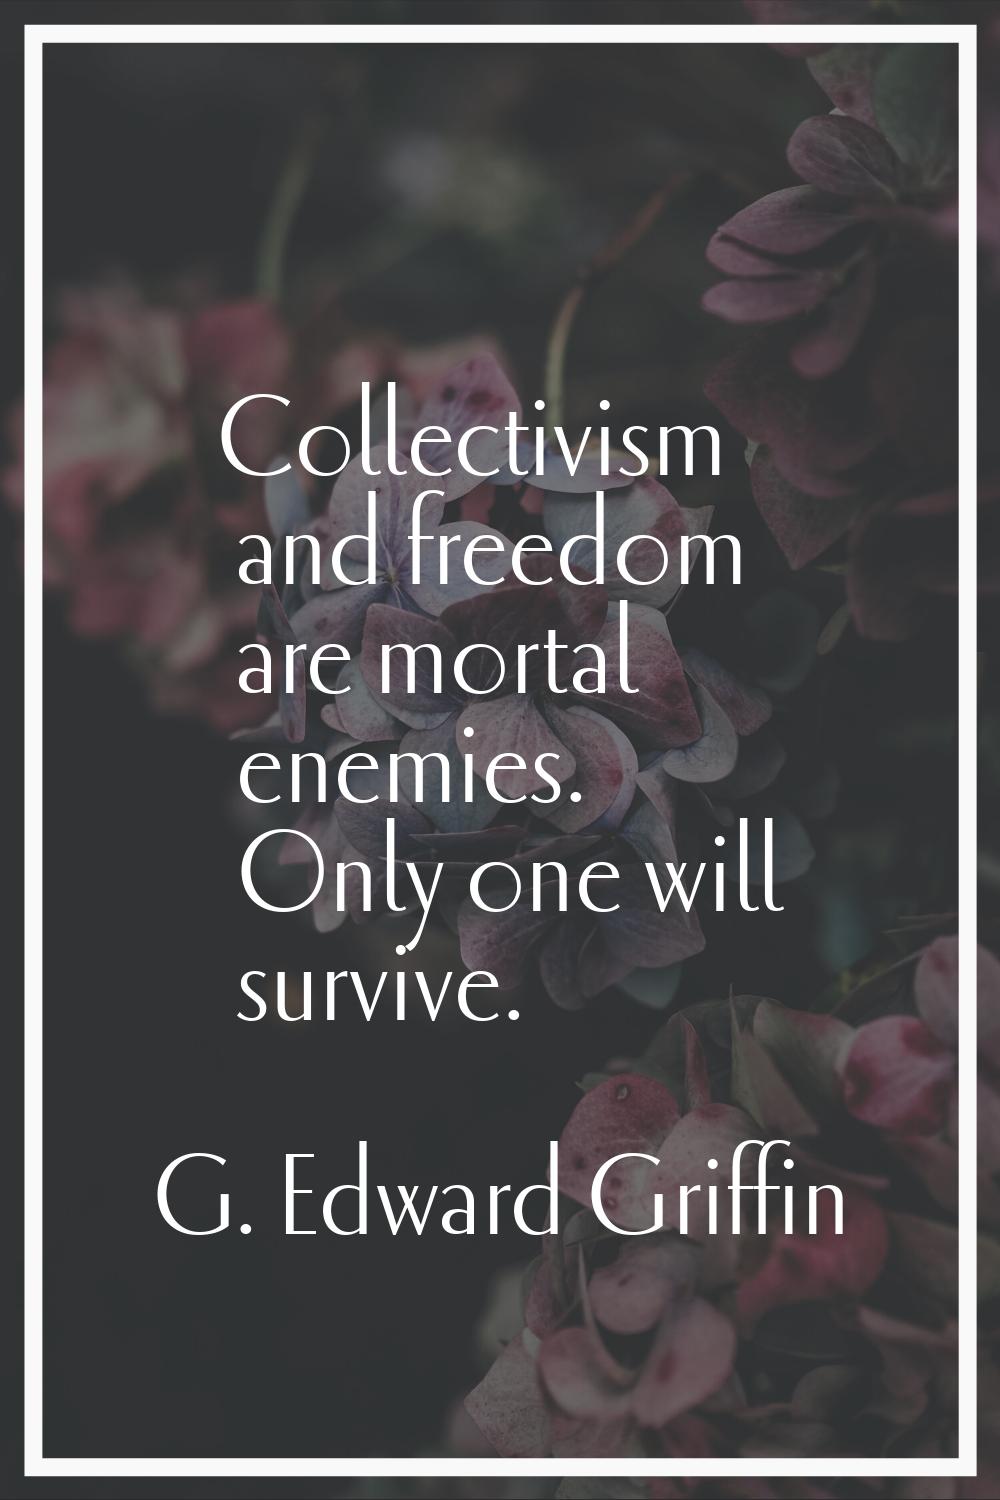 Collectivism and freedom are mortal enemies. Only one will survive.